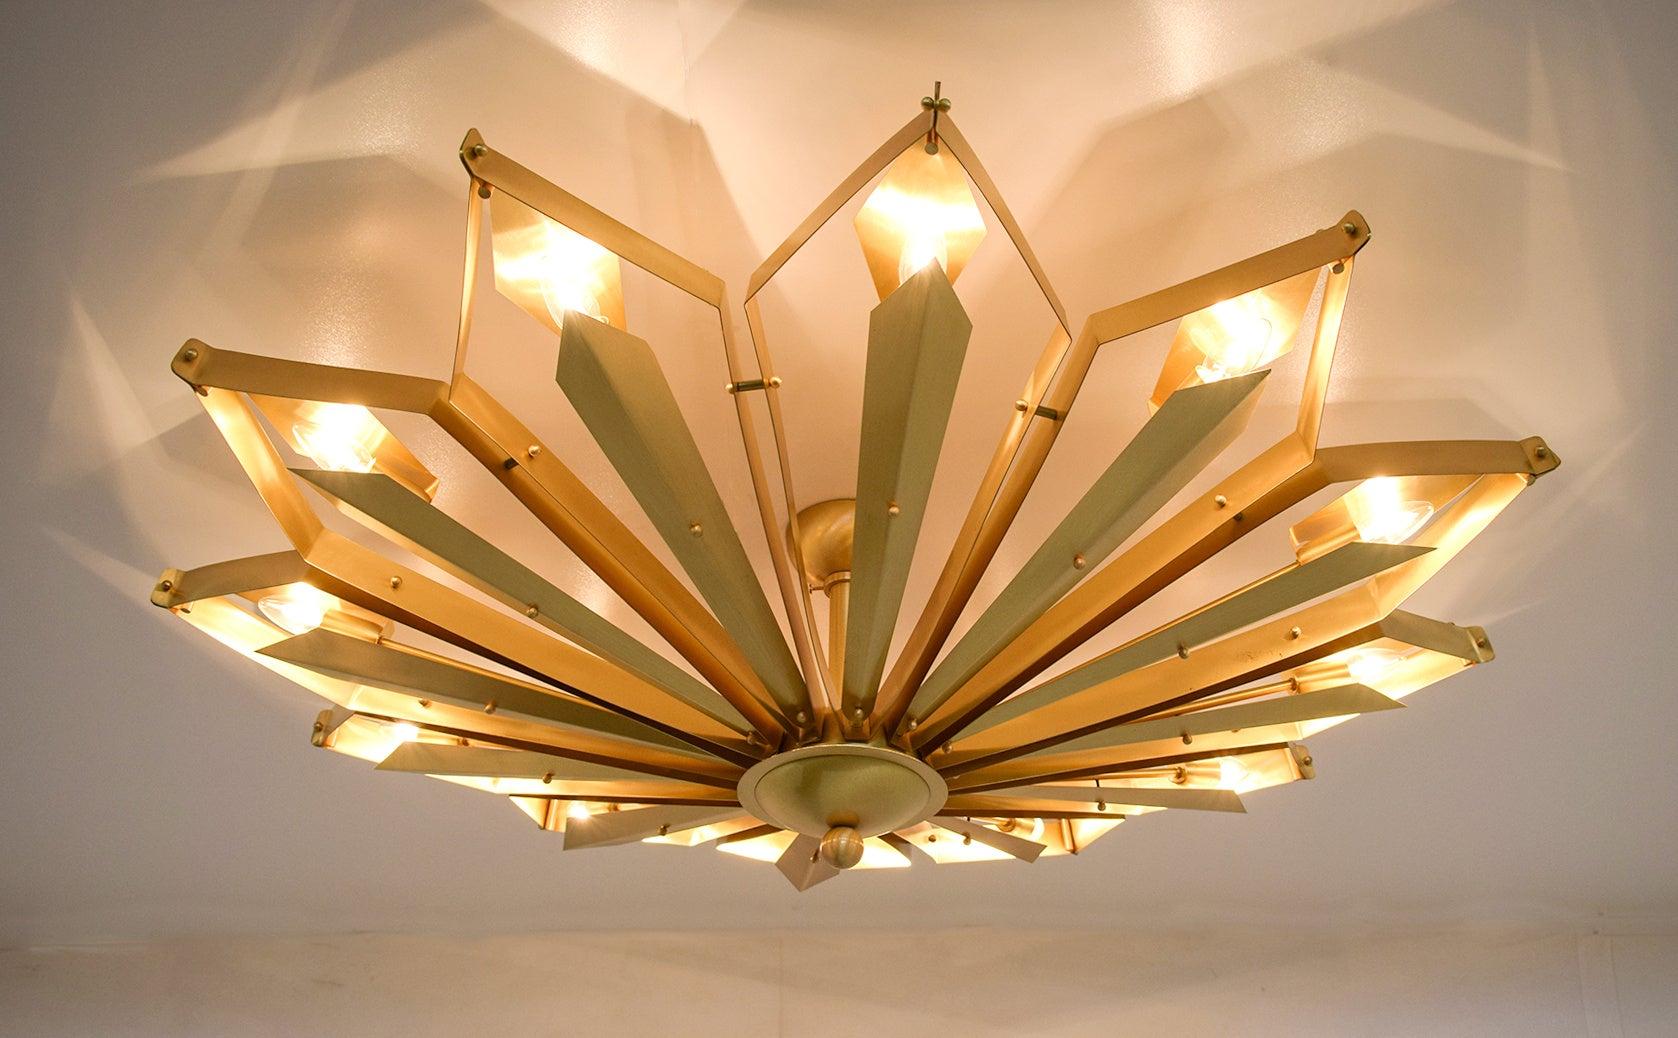 Elegant Italian flushmount with satin brass frame handcrafted to resemble a convex dahlia flower, designed by Fabio Bergomi for Fabio Ltd / Made in Italy
12 lights / E12 or E14 type / max 40W each
Measures: Diameter 51 inches, height 16 inches
Order